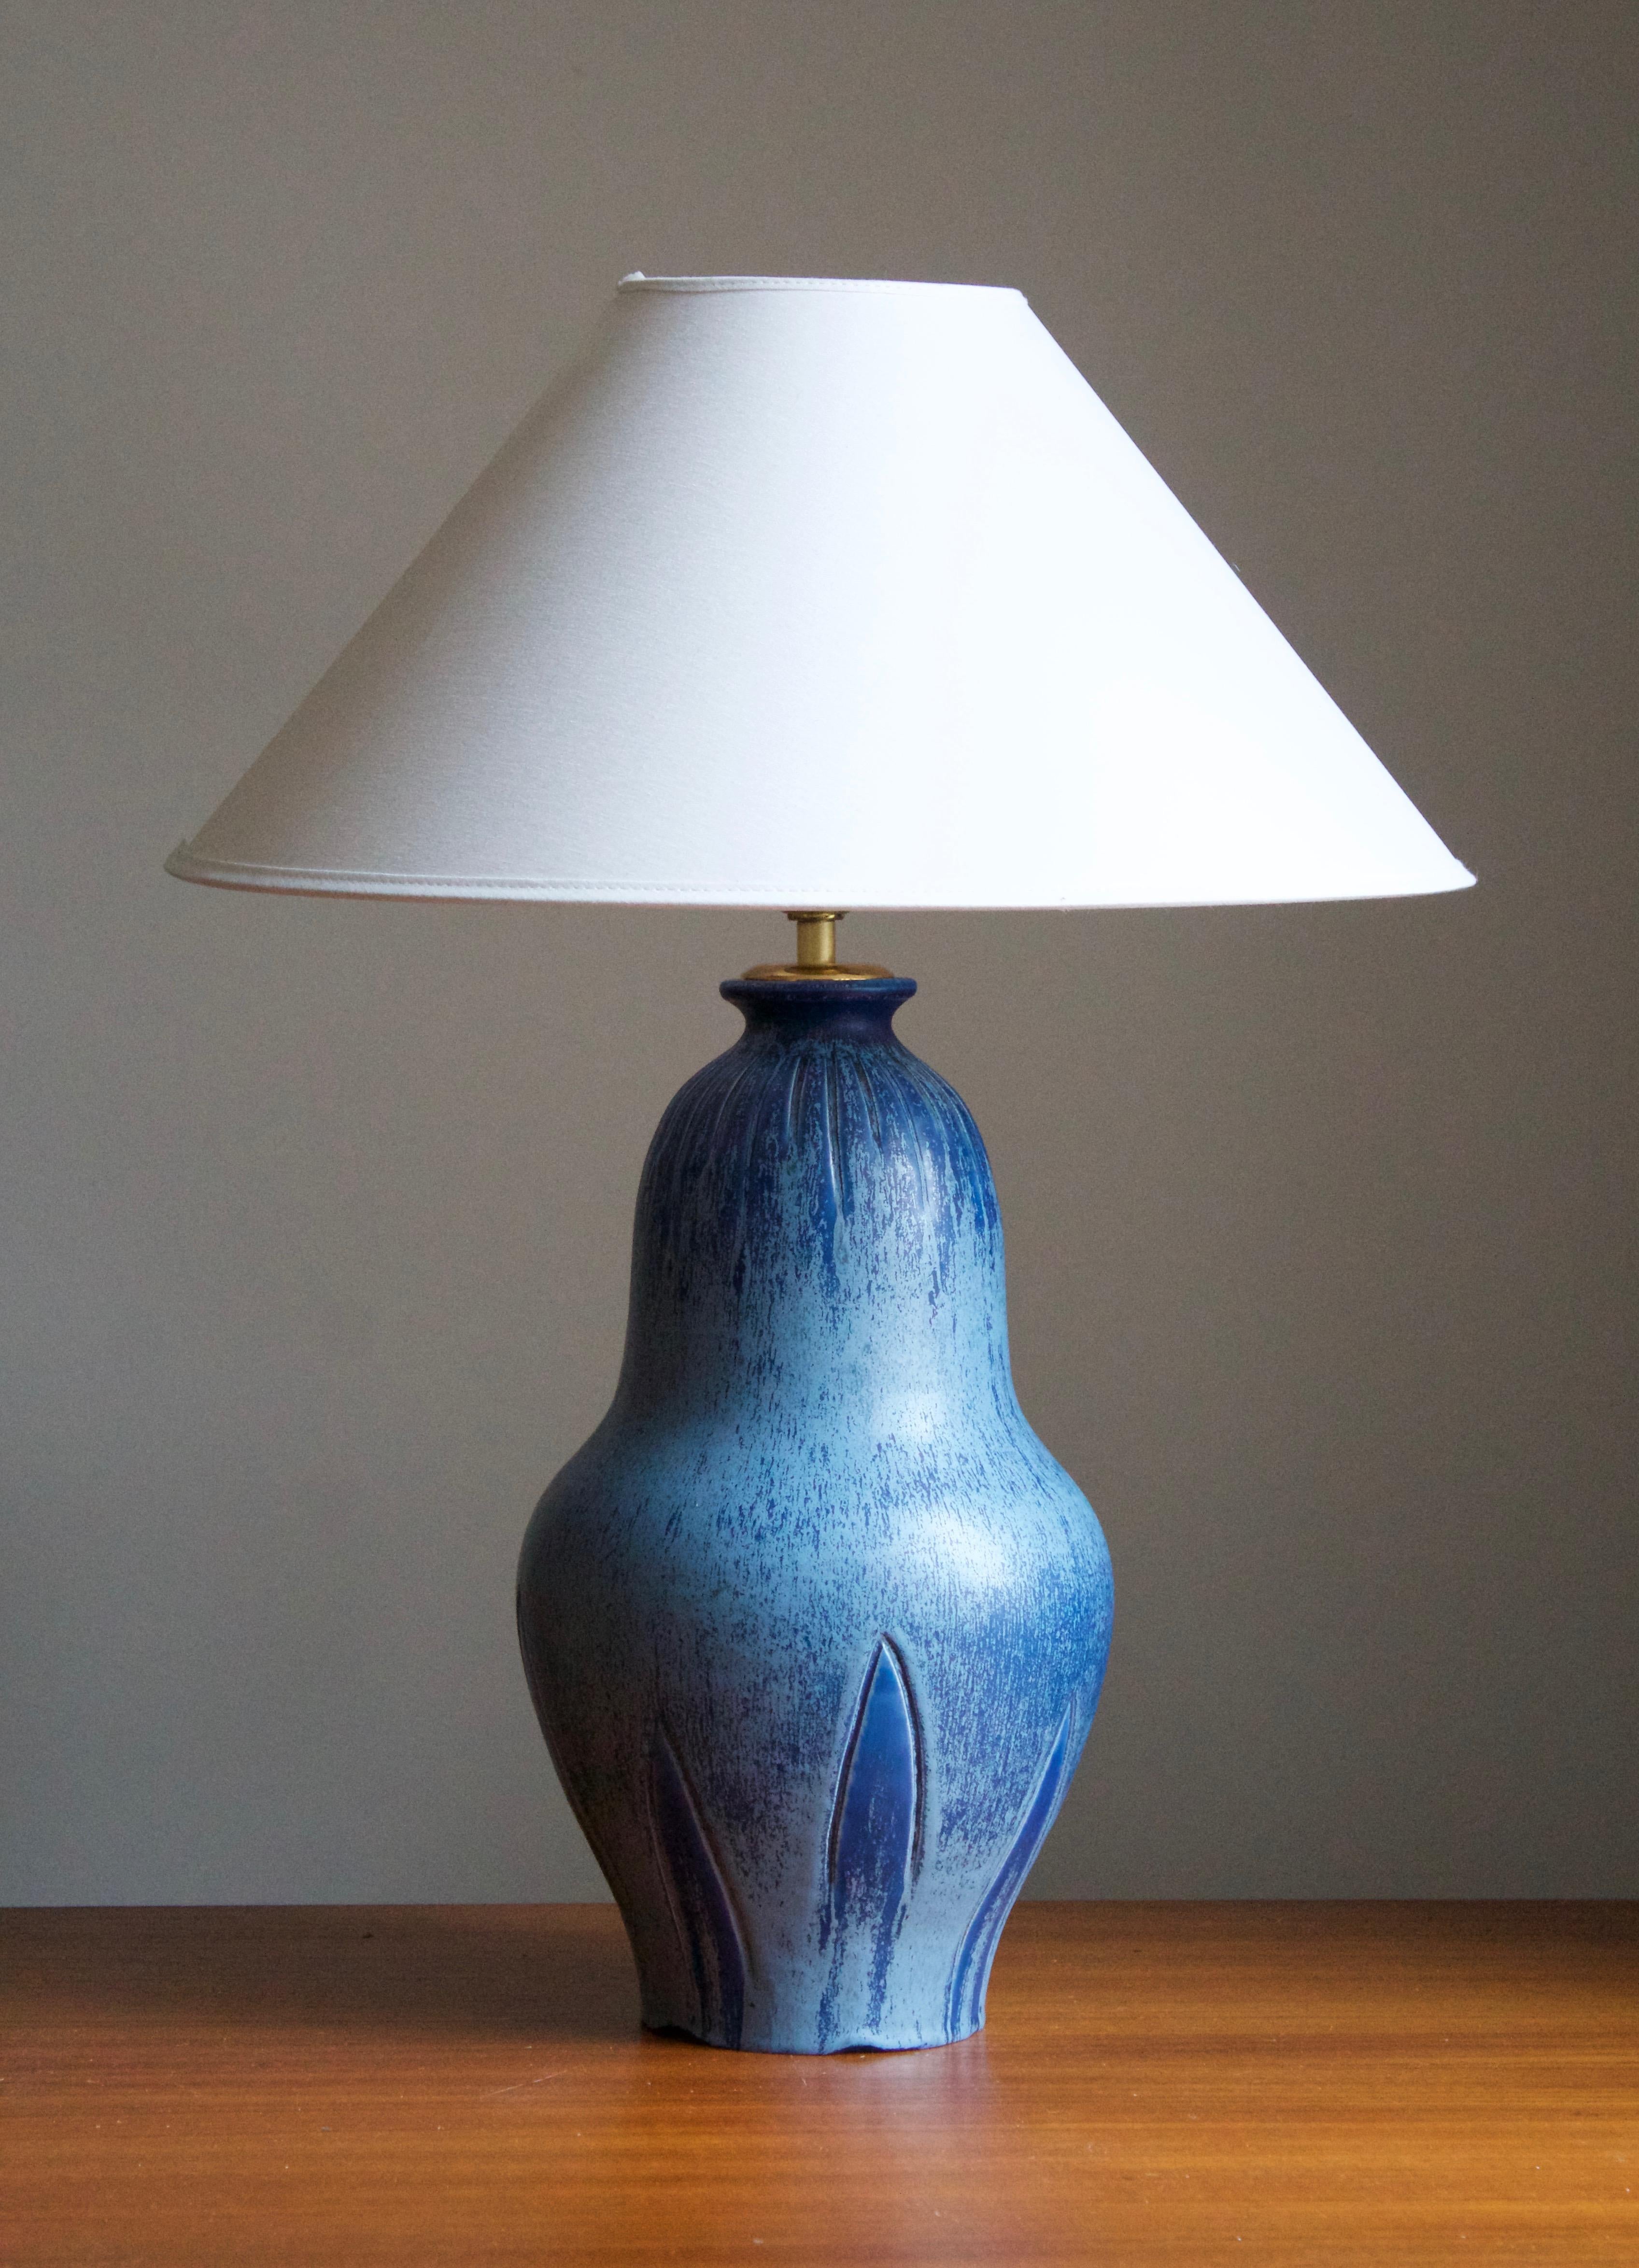 A large early modernist table lamp. Bo Fajans, Sweden, 1930s. Marked. Features finely glazed earthenware or stoneware, with simple incised decoration.

Lampshade not included. Stated dimensions excluding lampshade. 

Other designers of the